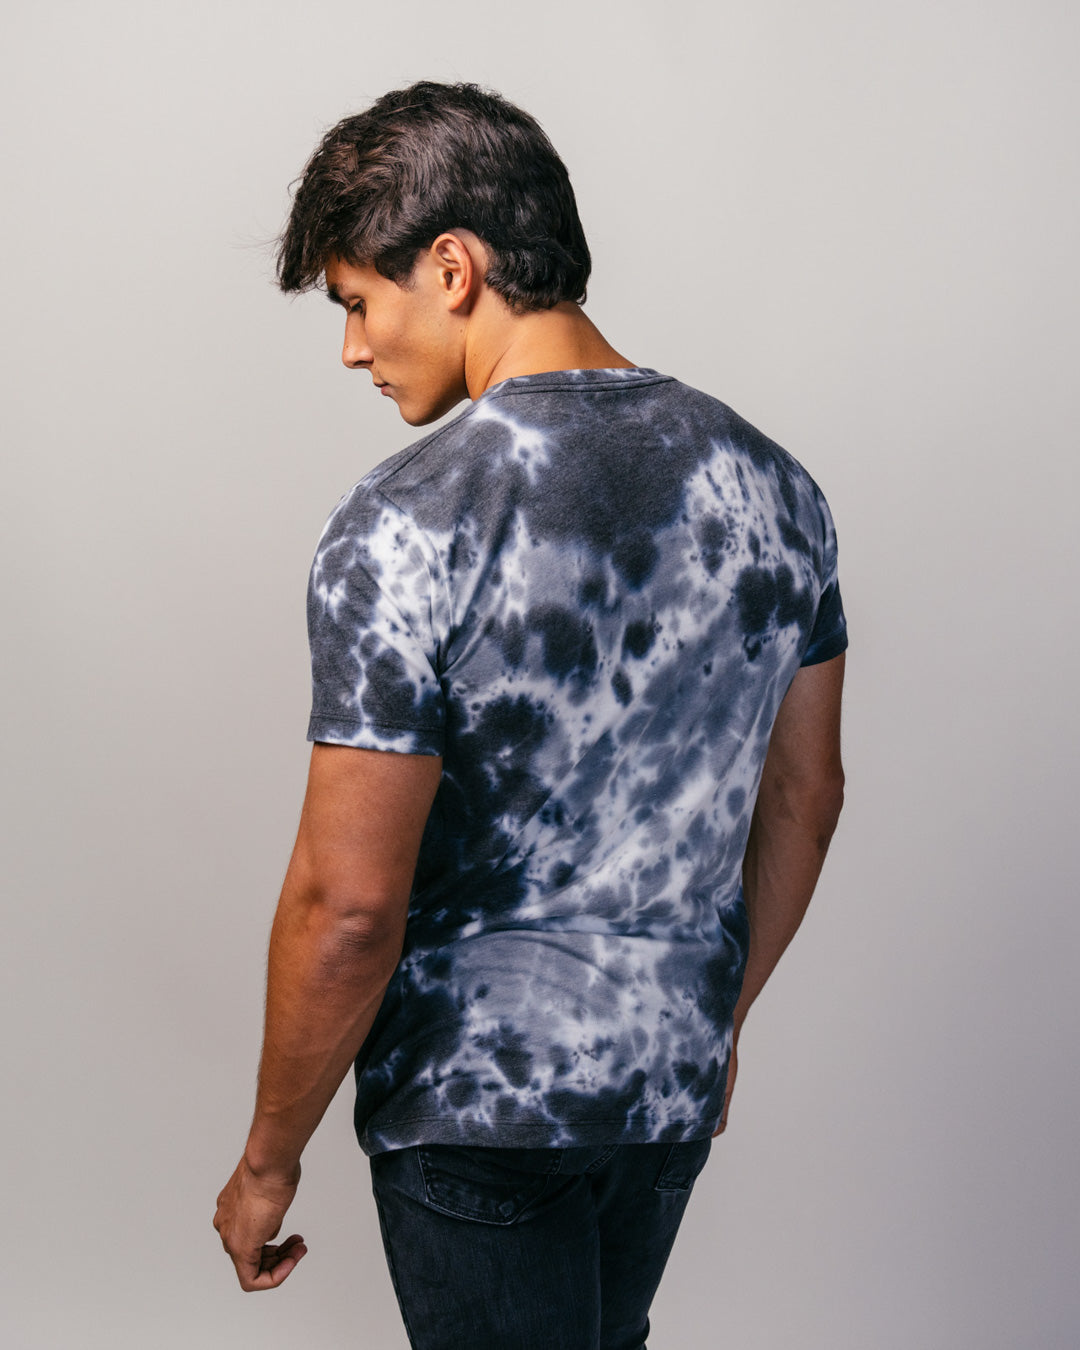 Blue and White Tie Dye Unisex Essential T-Shirt